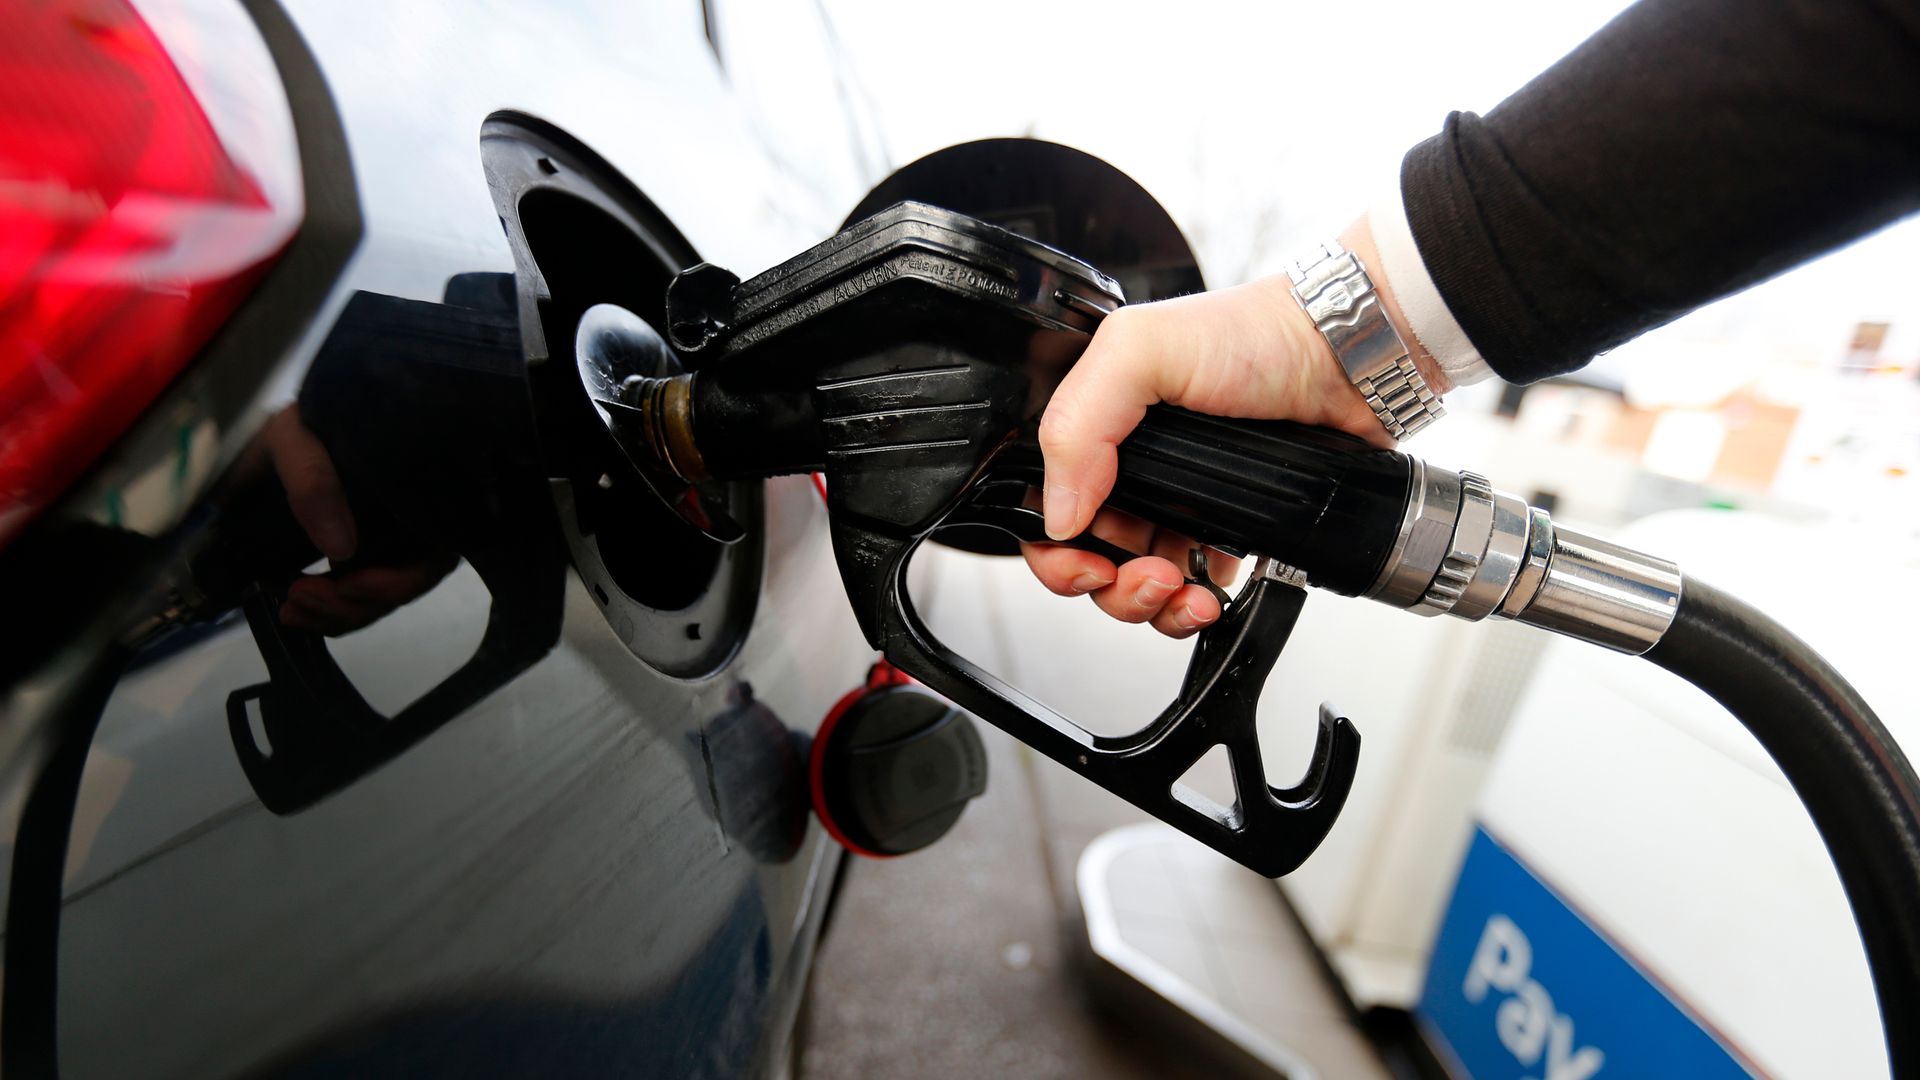 Drivers warned 'fill up sooner rather than later' as petrol prices 'rising'